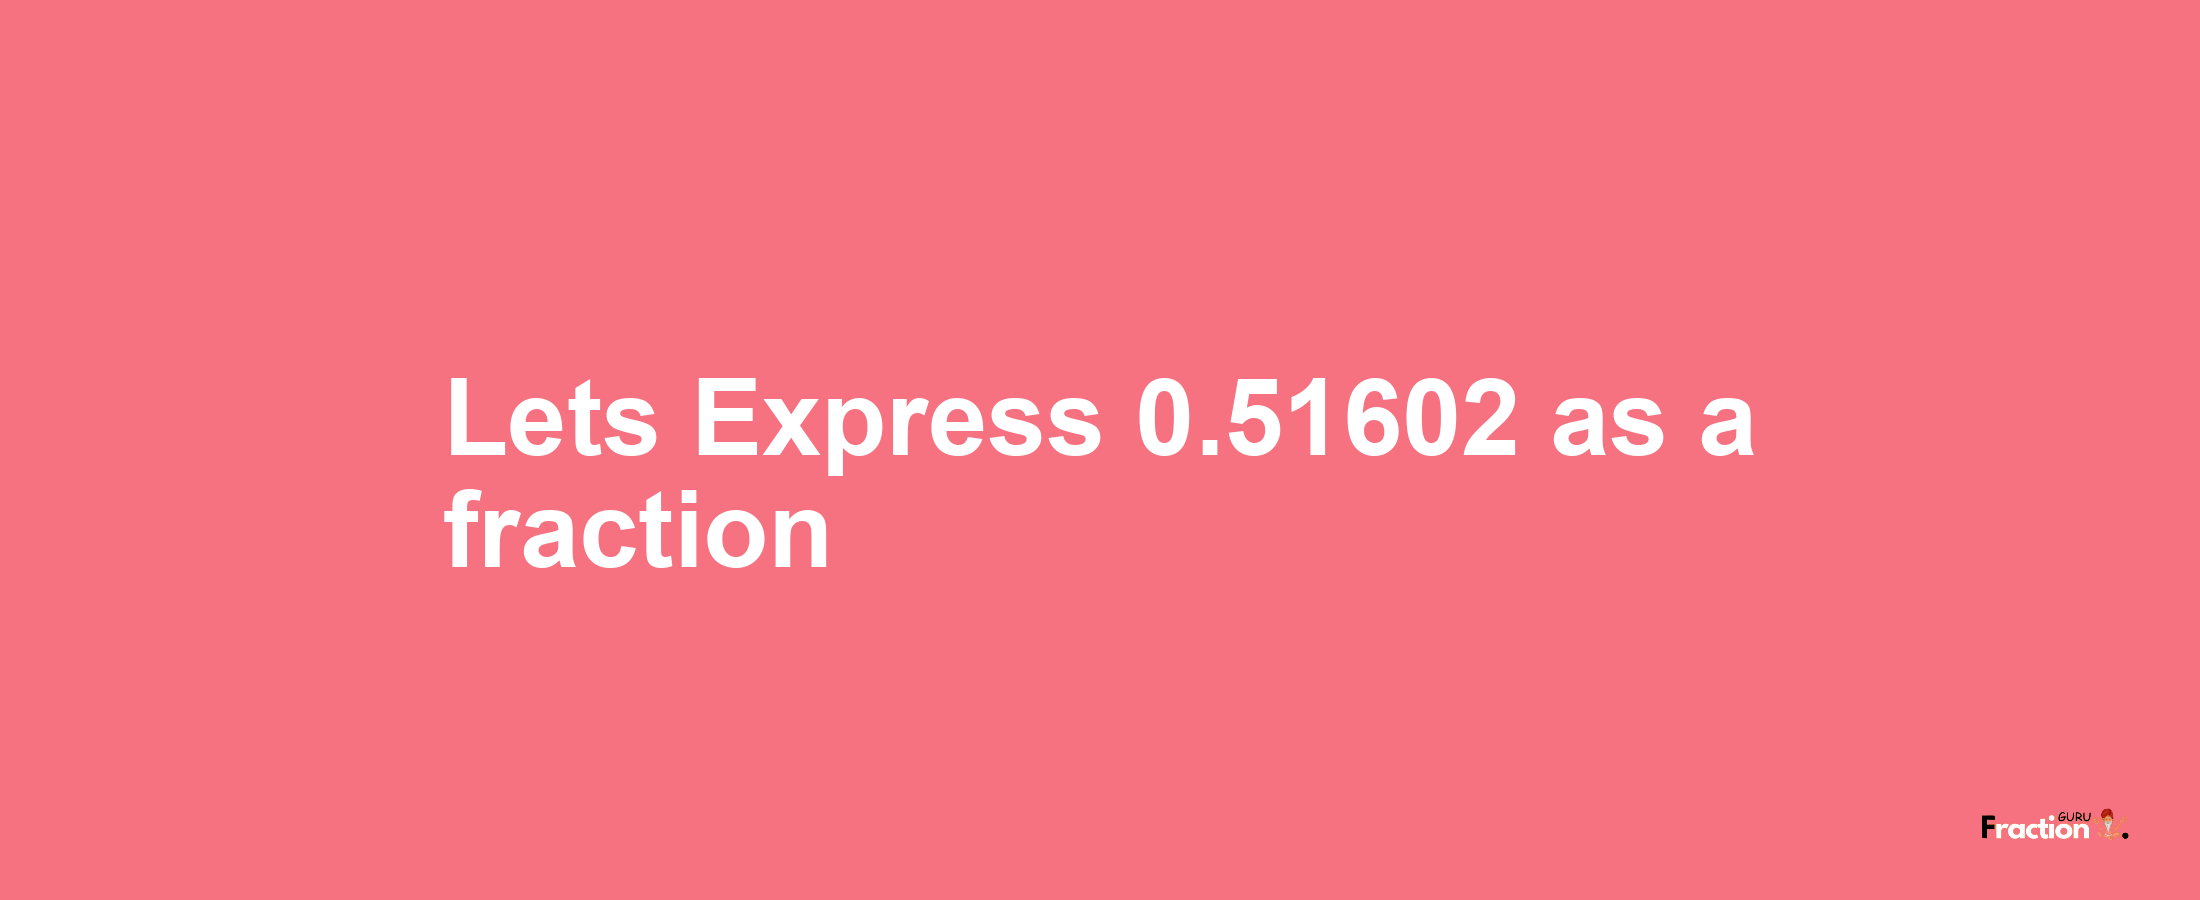 Lets Express 0.51602 as afraction